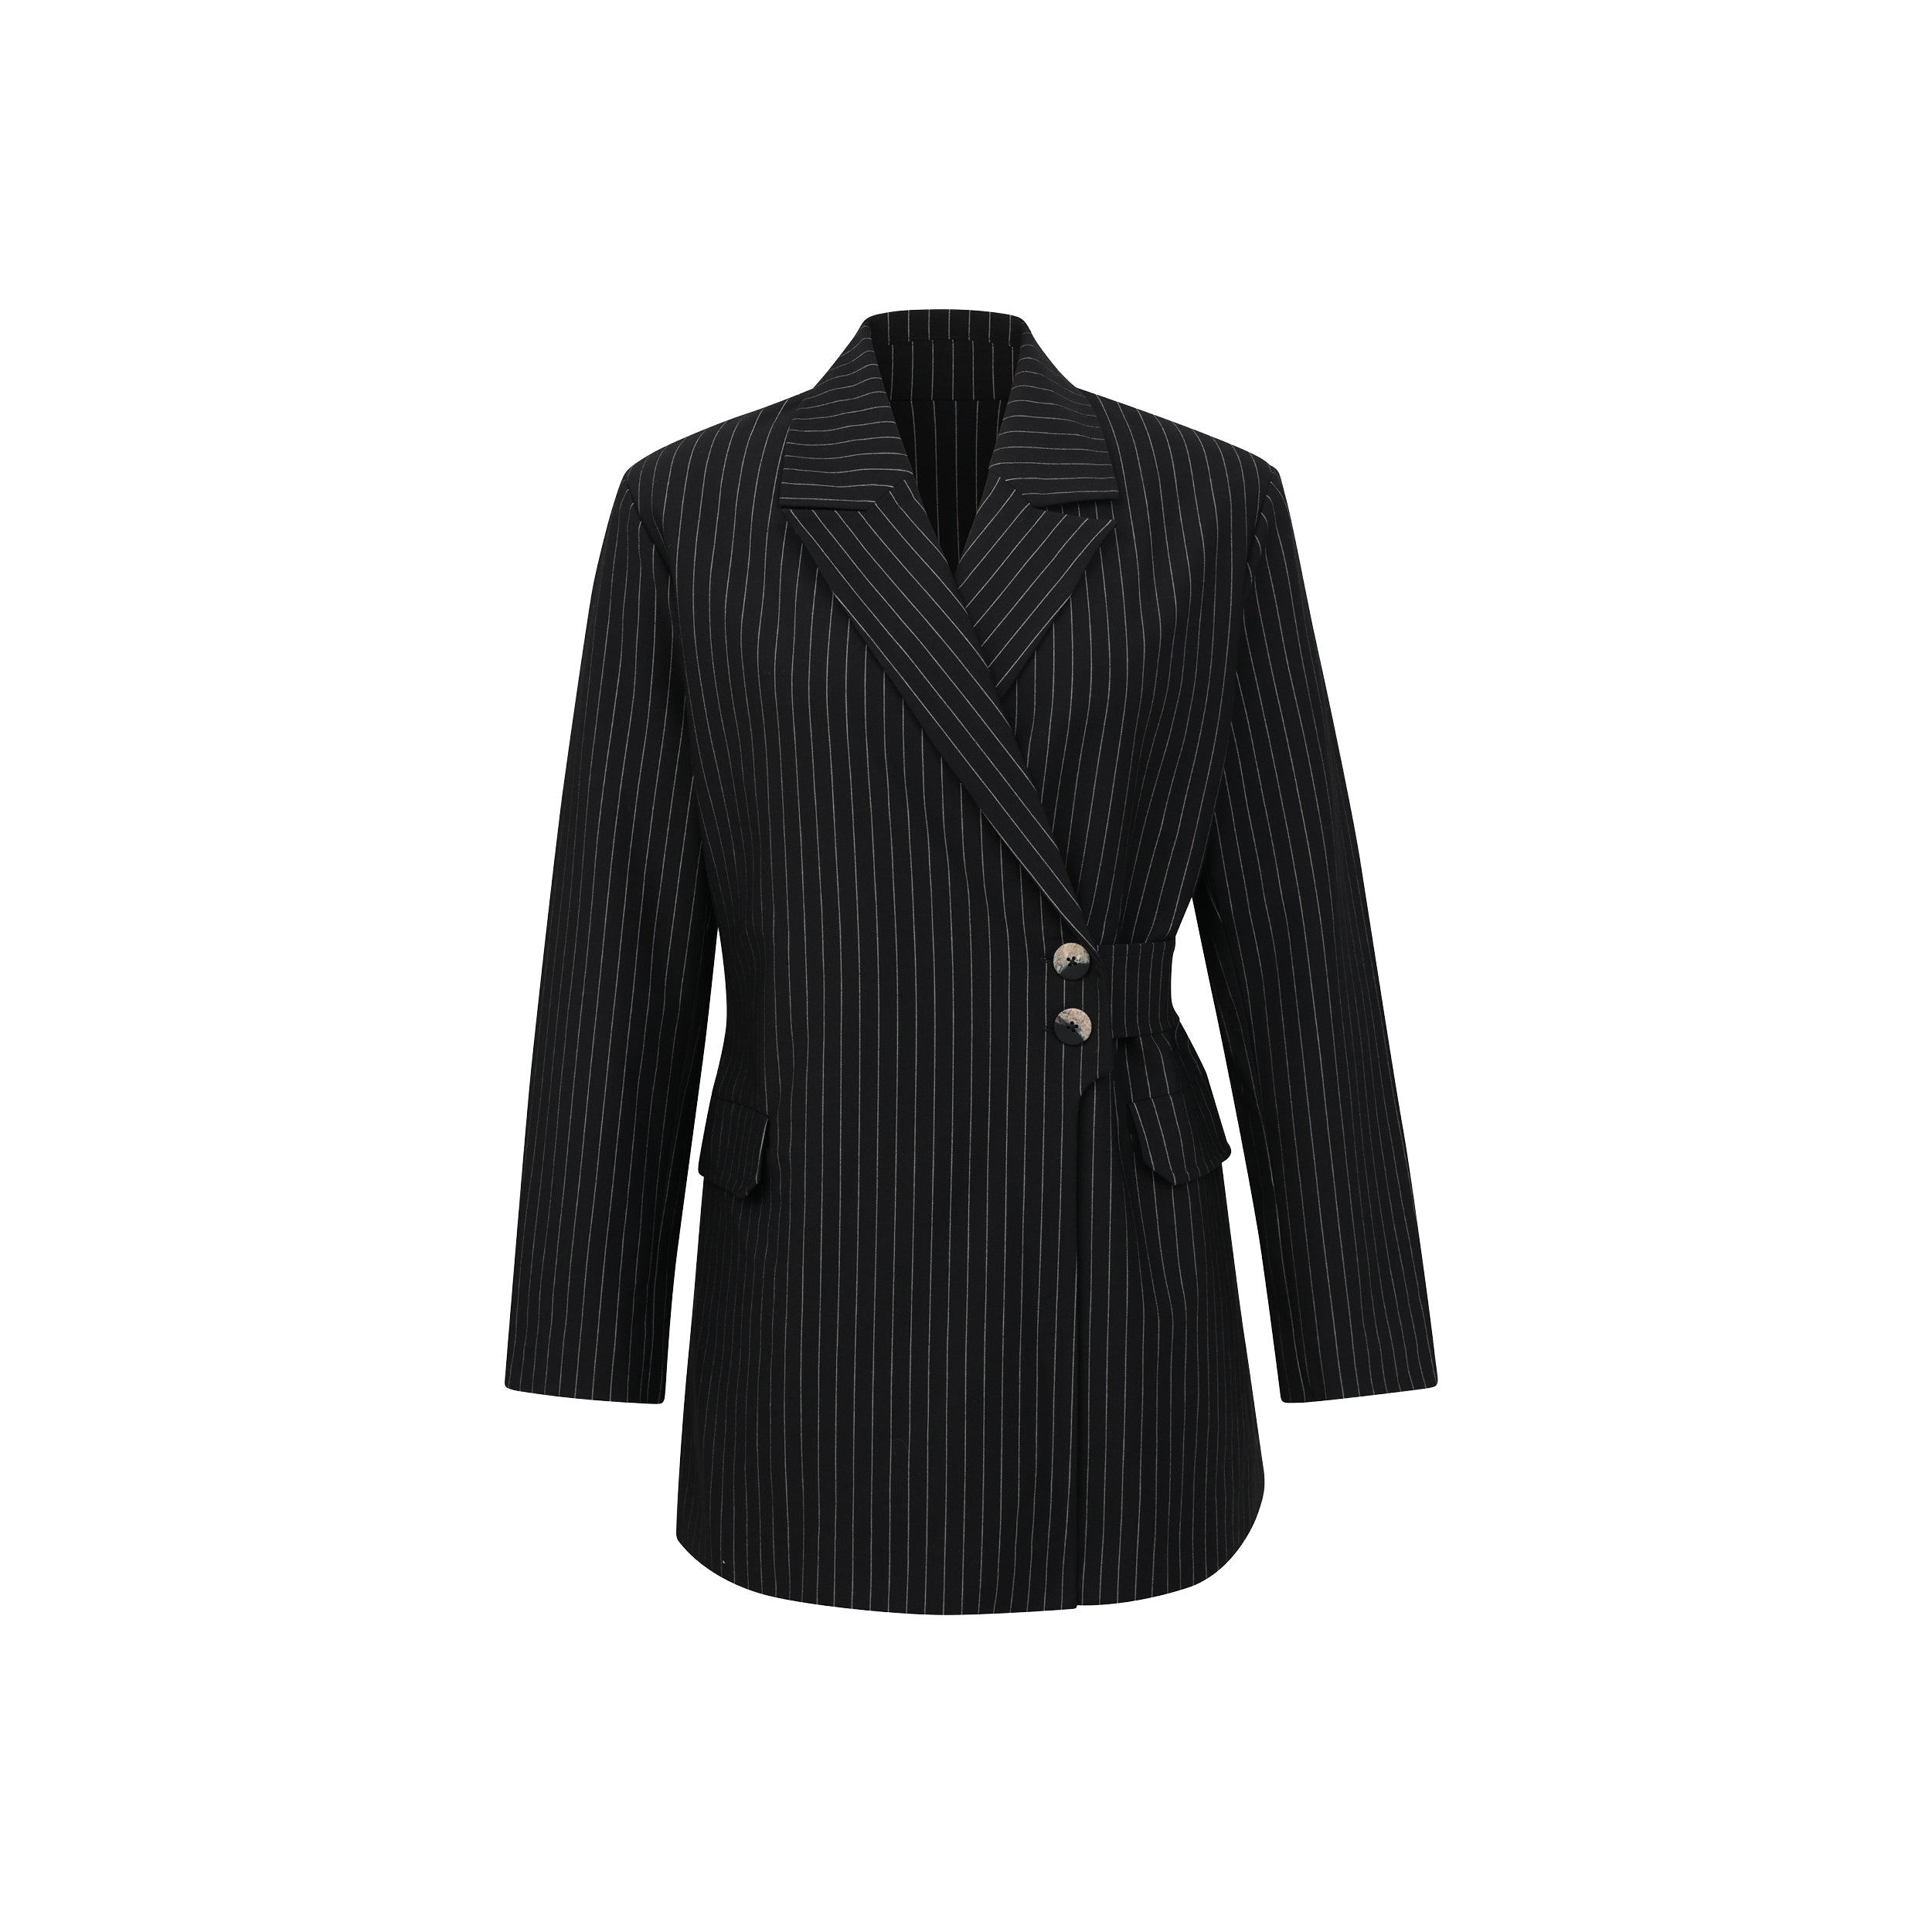 Product view of black pinstripe blazer, featuring peaked lapel, flap pockets, detachable belt with button closure, flap pockets and silky lining.